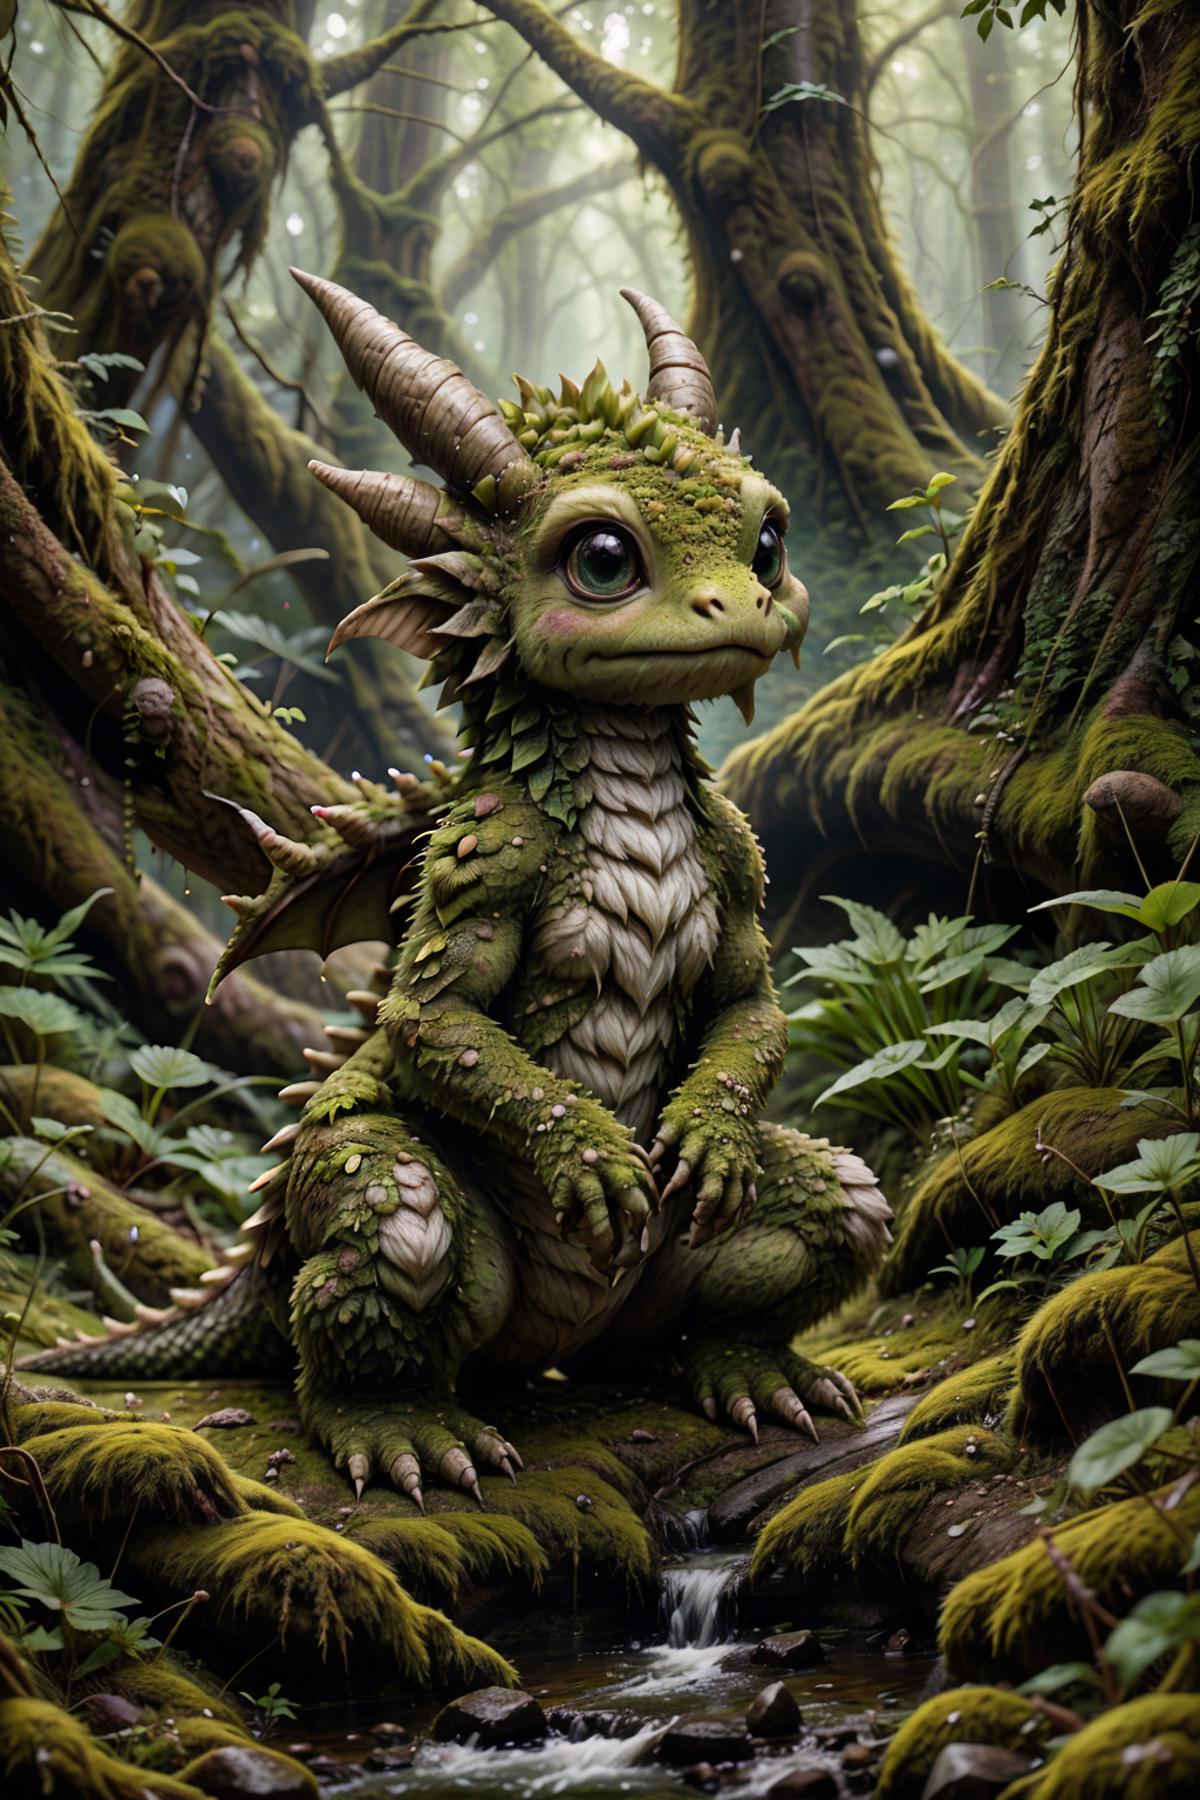 A green dragon with horns sitting on a mossy log.